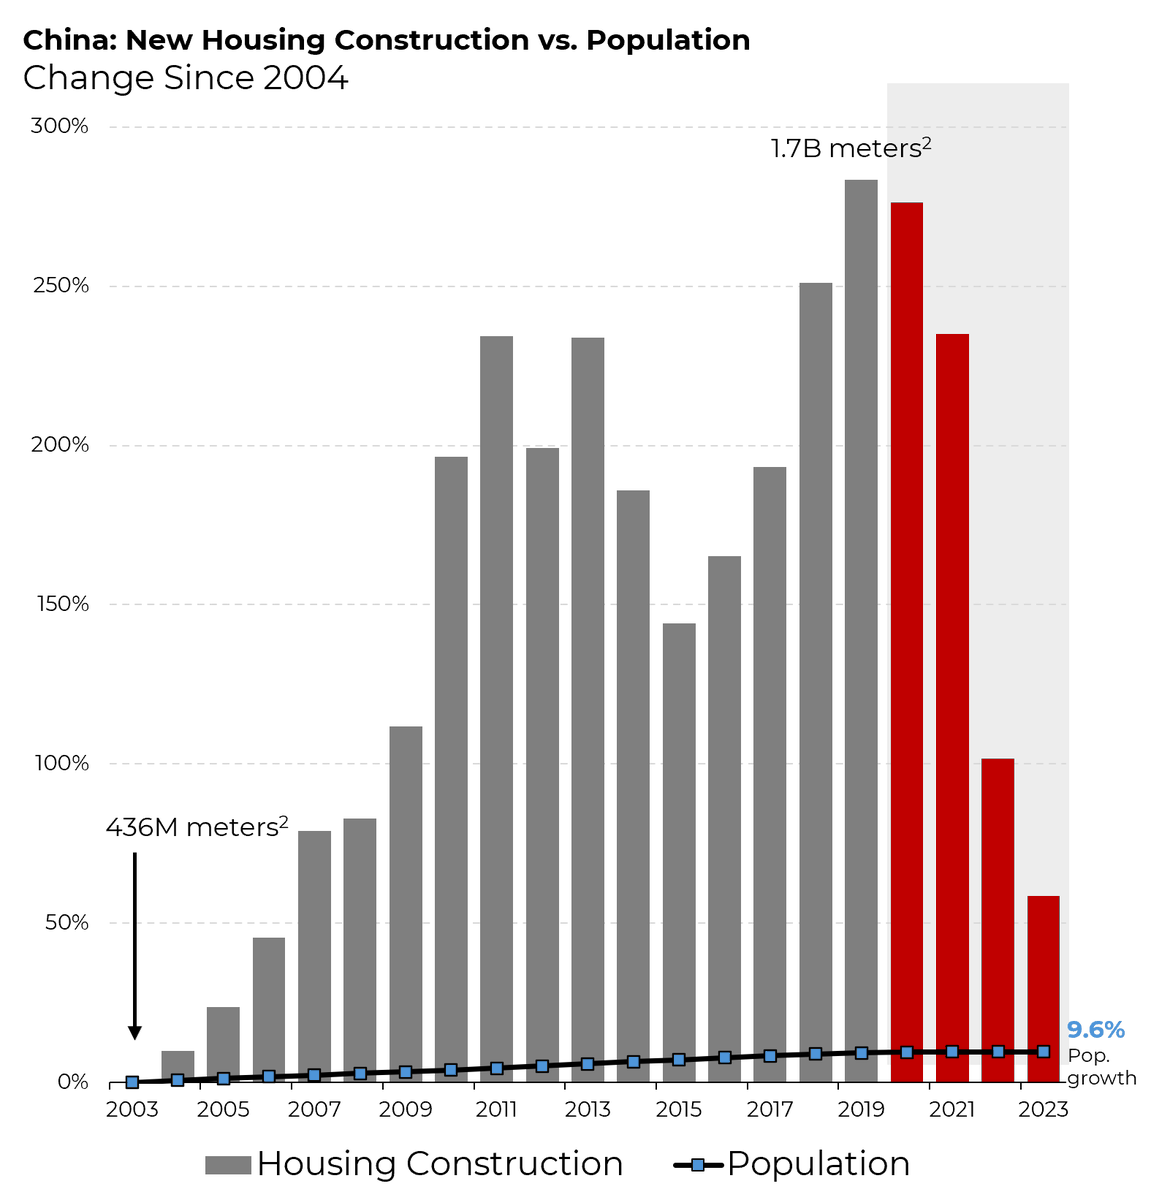 Between 2003 and 2019, construction of new residential property in China ballooned by 280%. Over the same period, its population grew just 9%. Now, the country has more homes than it can fill. @Morning_Joe